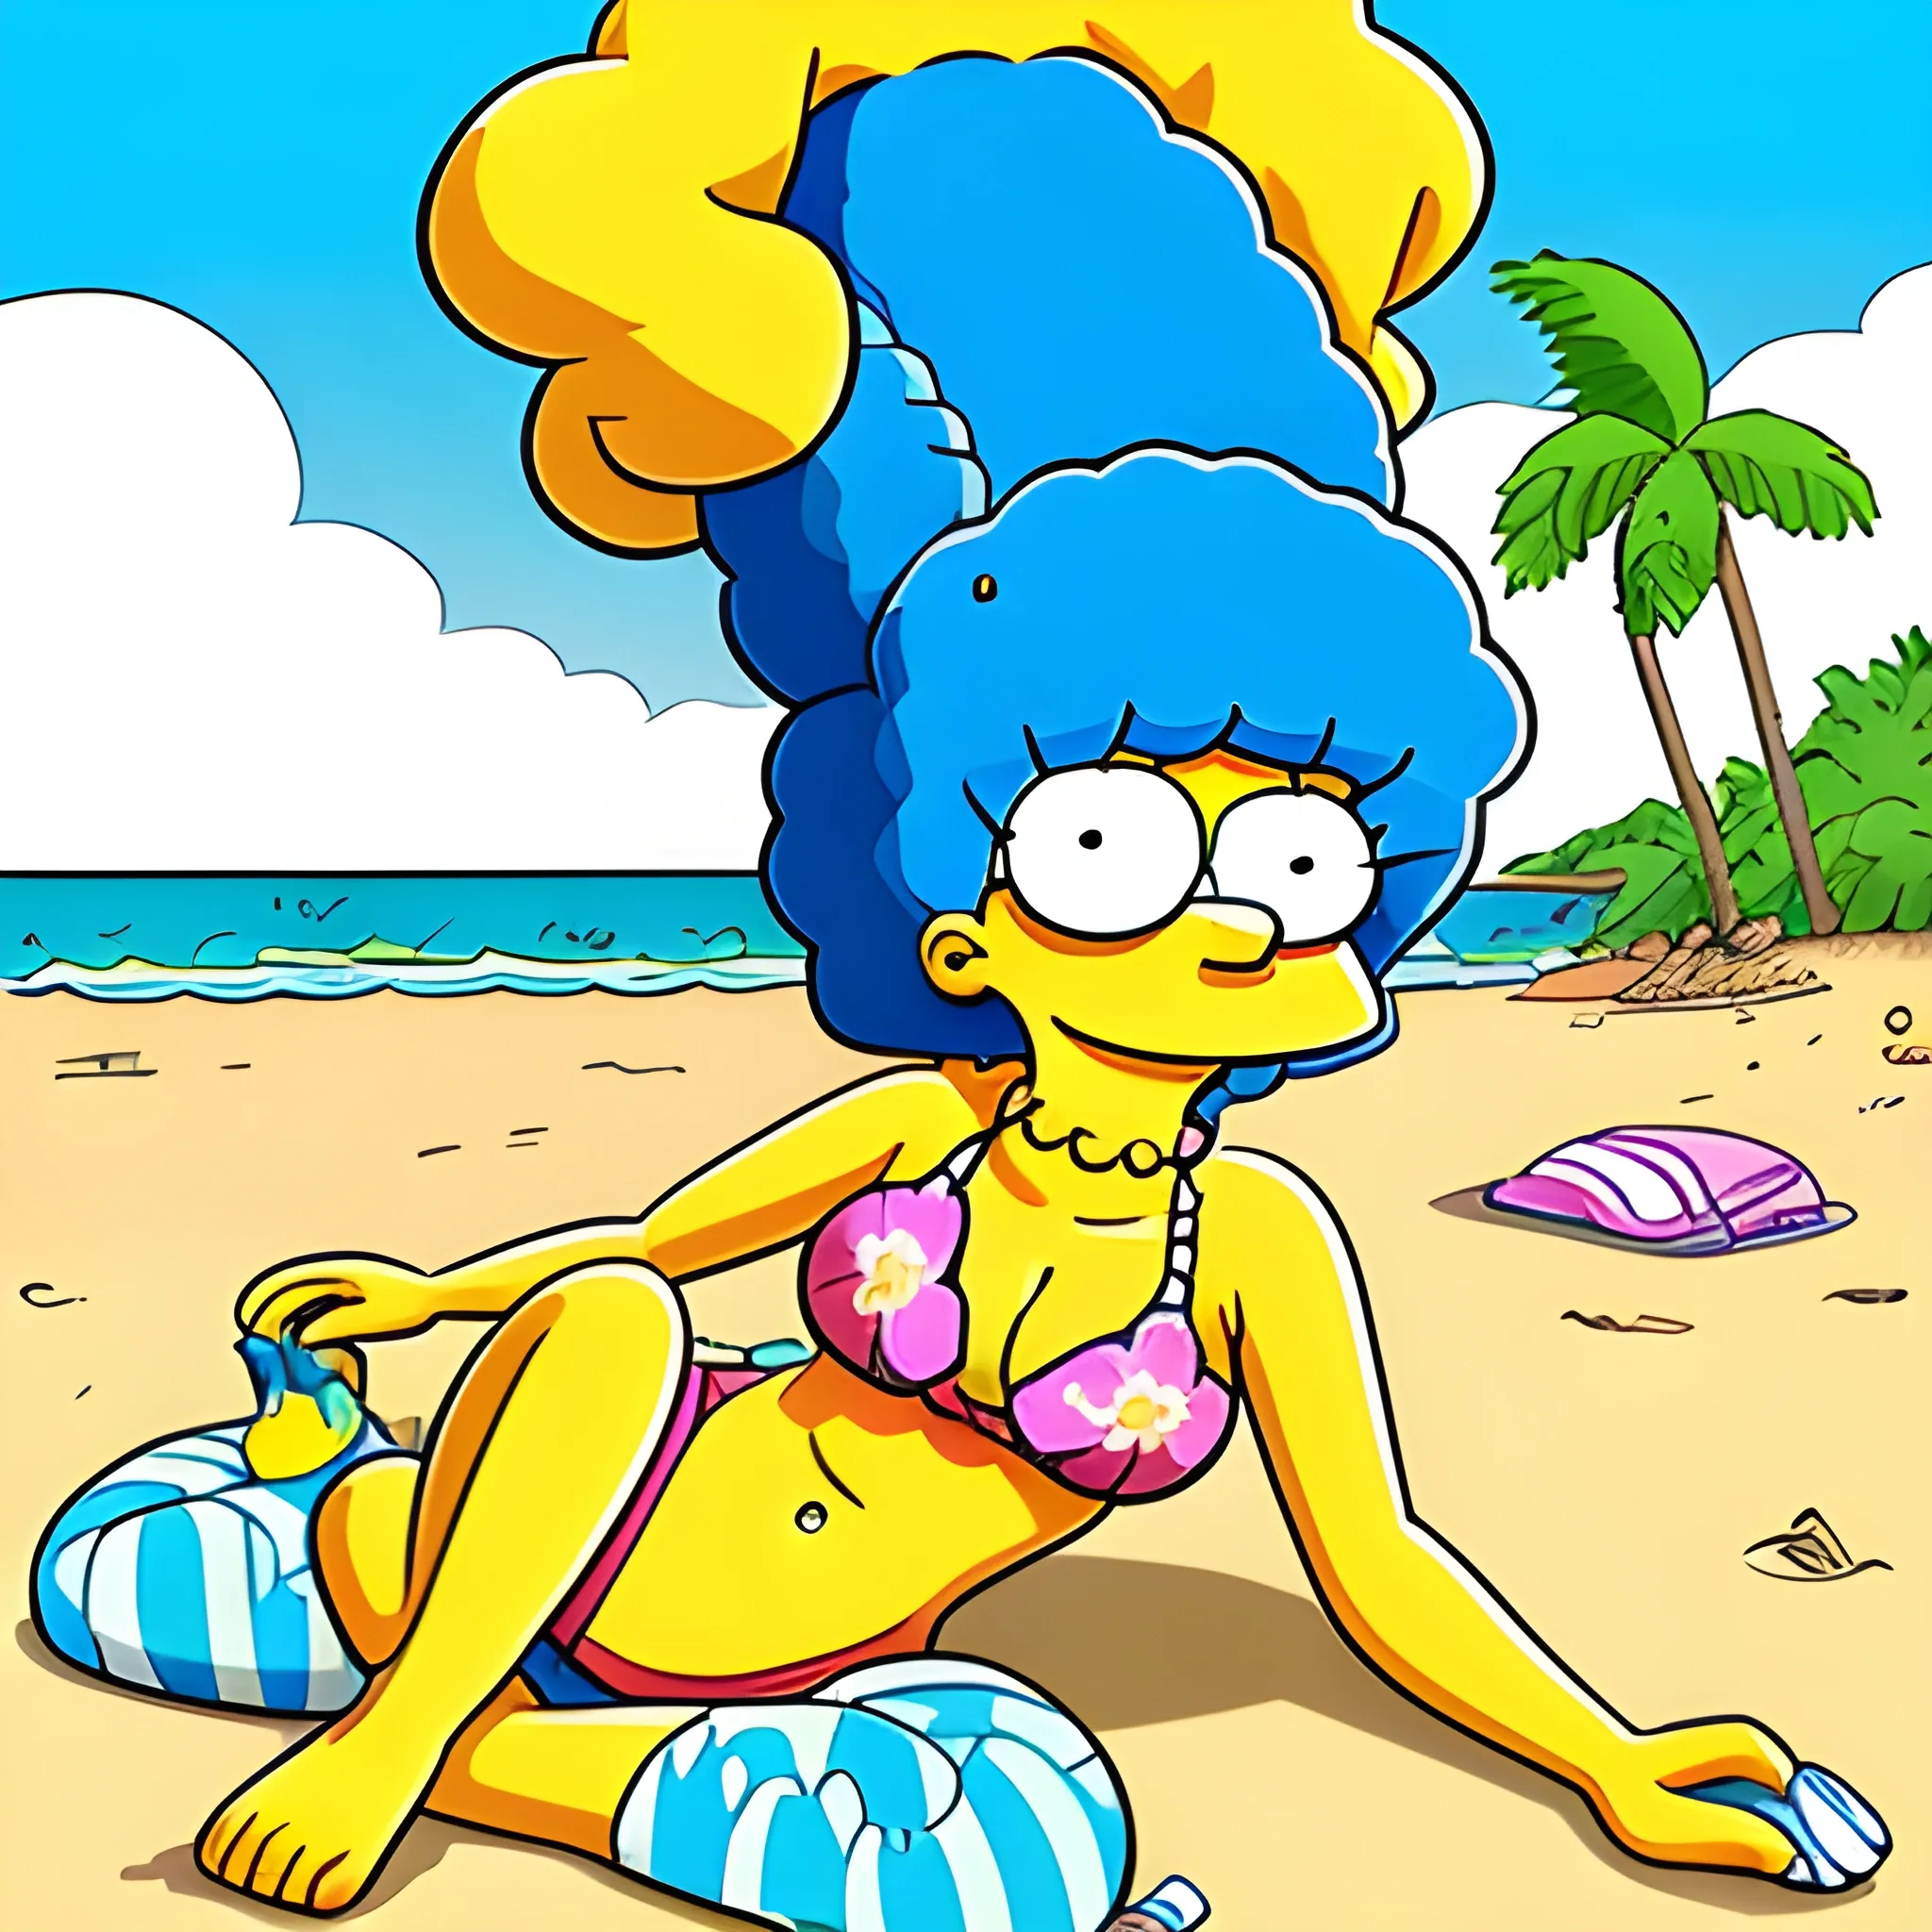 Cartoon-style drawing of Marge Simpson from The Simpsons suntanning on the beach wearing a flower-pattern bikini. Drawn in typical style of Matt Groening's Simpsons, Cartoon